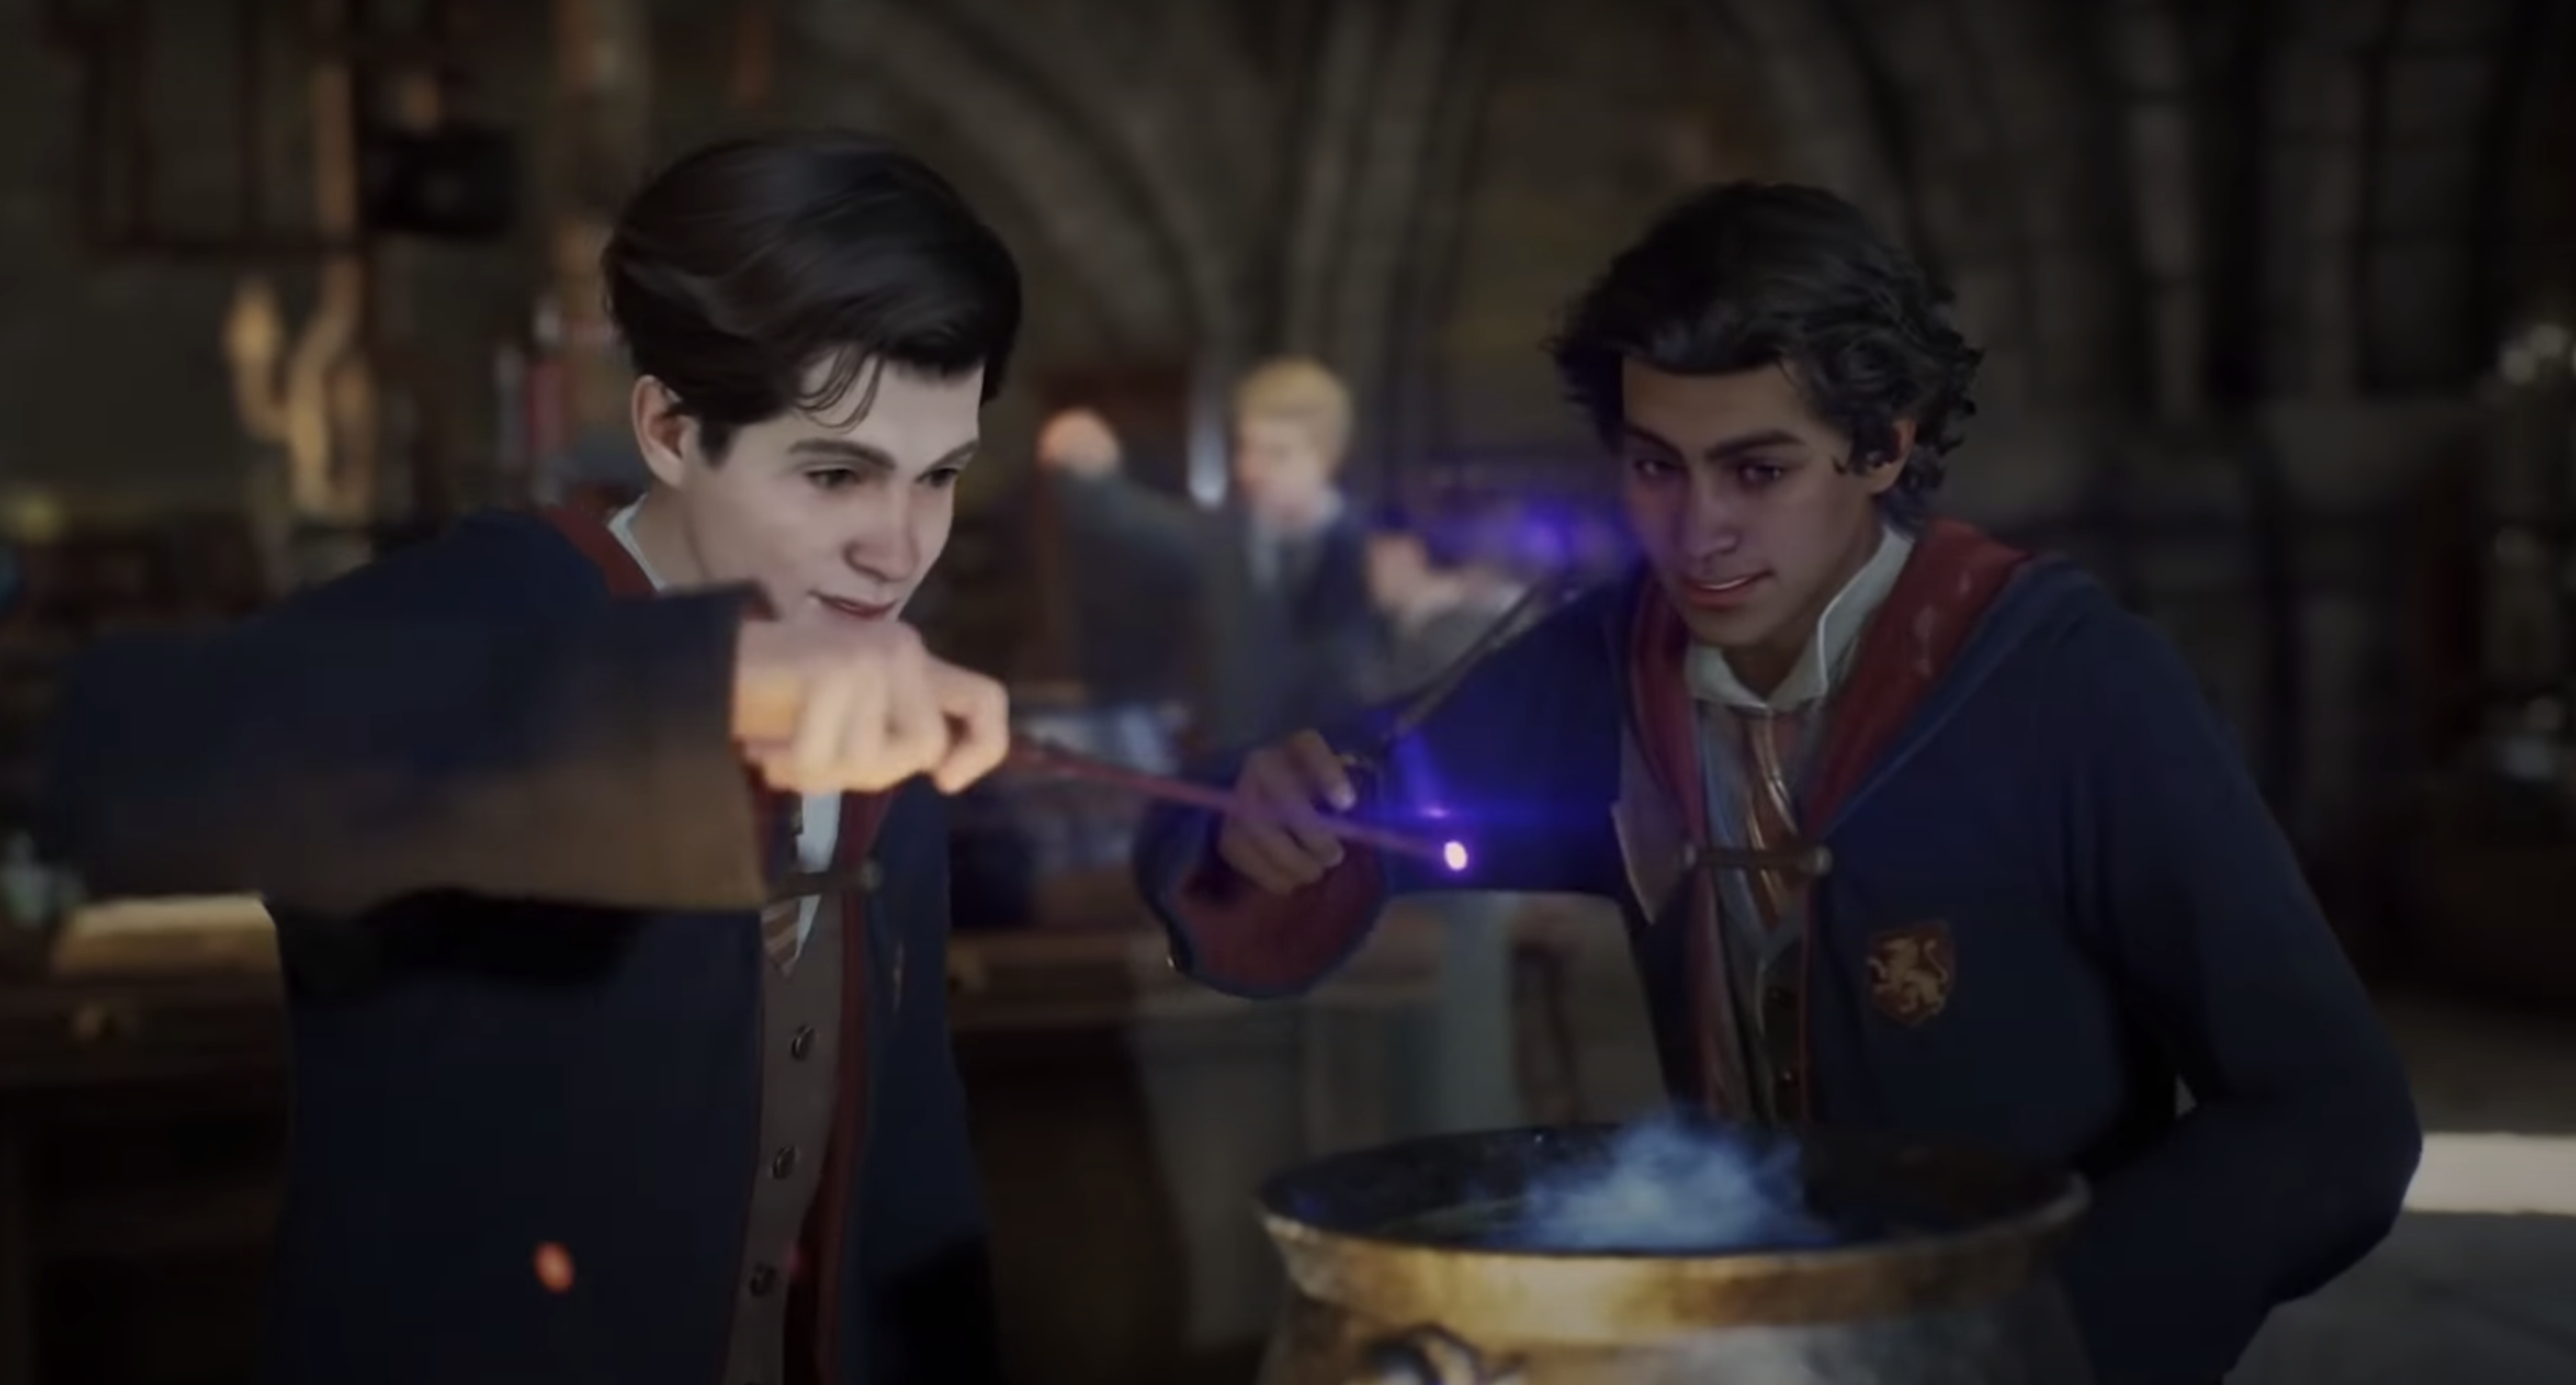 Hogwarts Legacy' Includes Harry Potter's First Trans Character